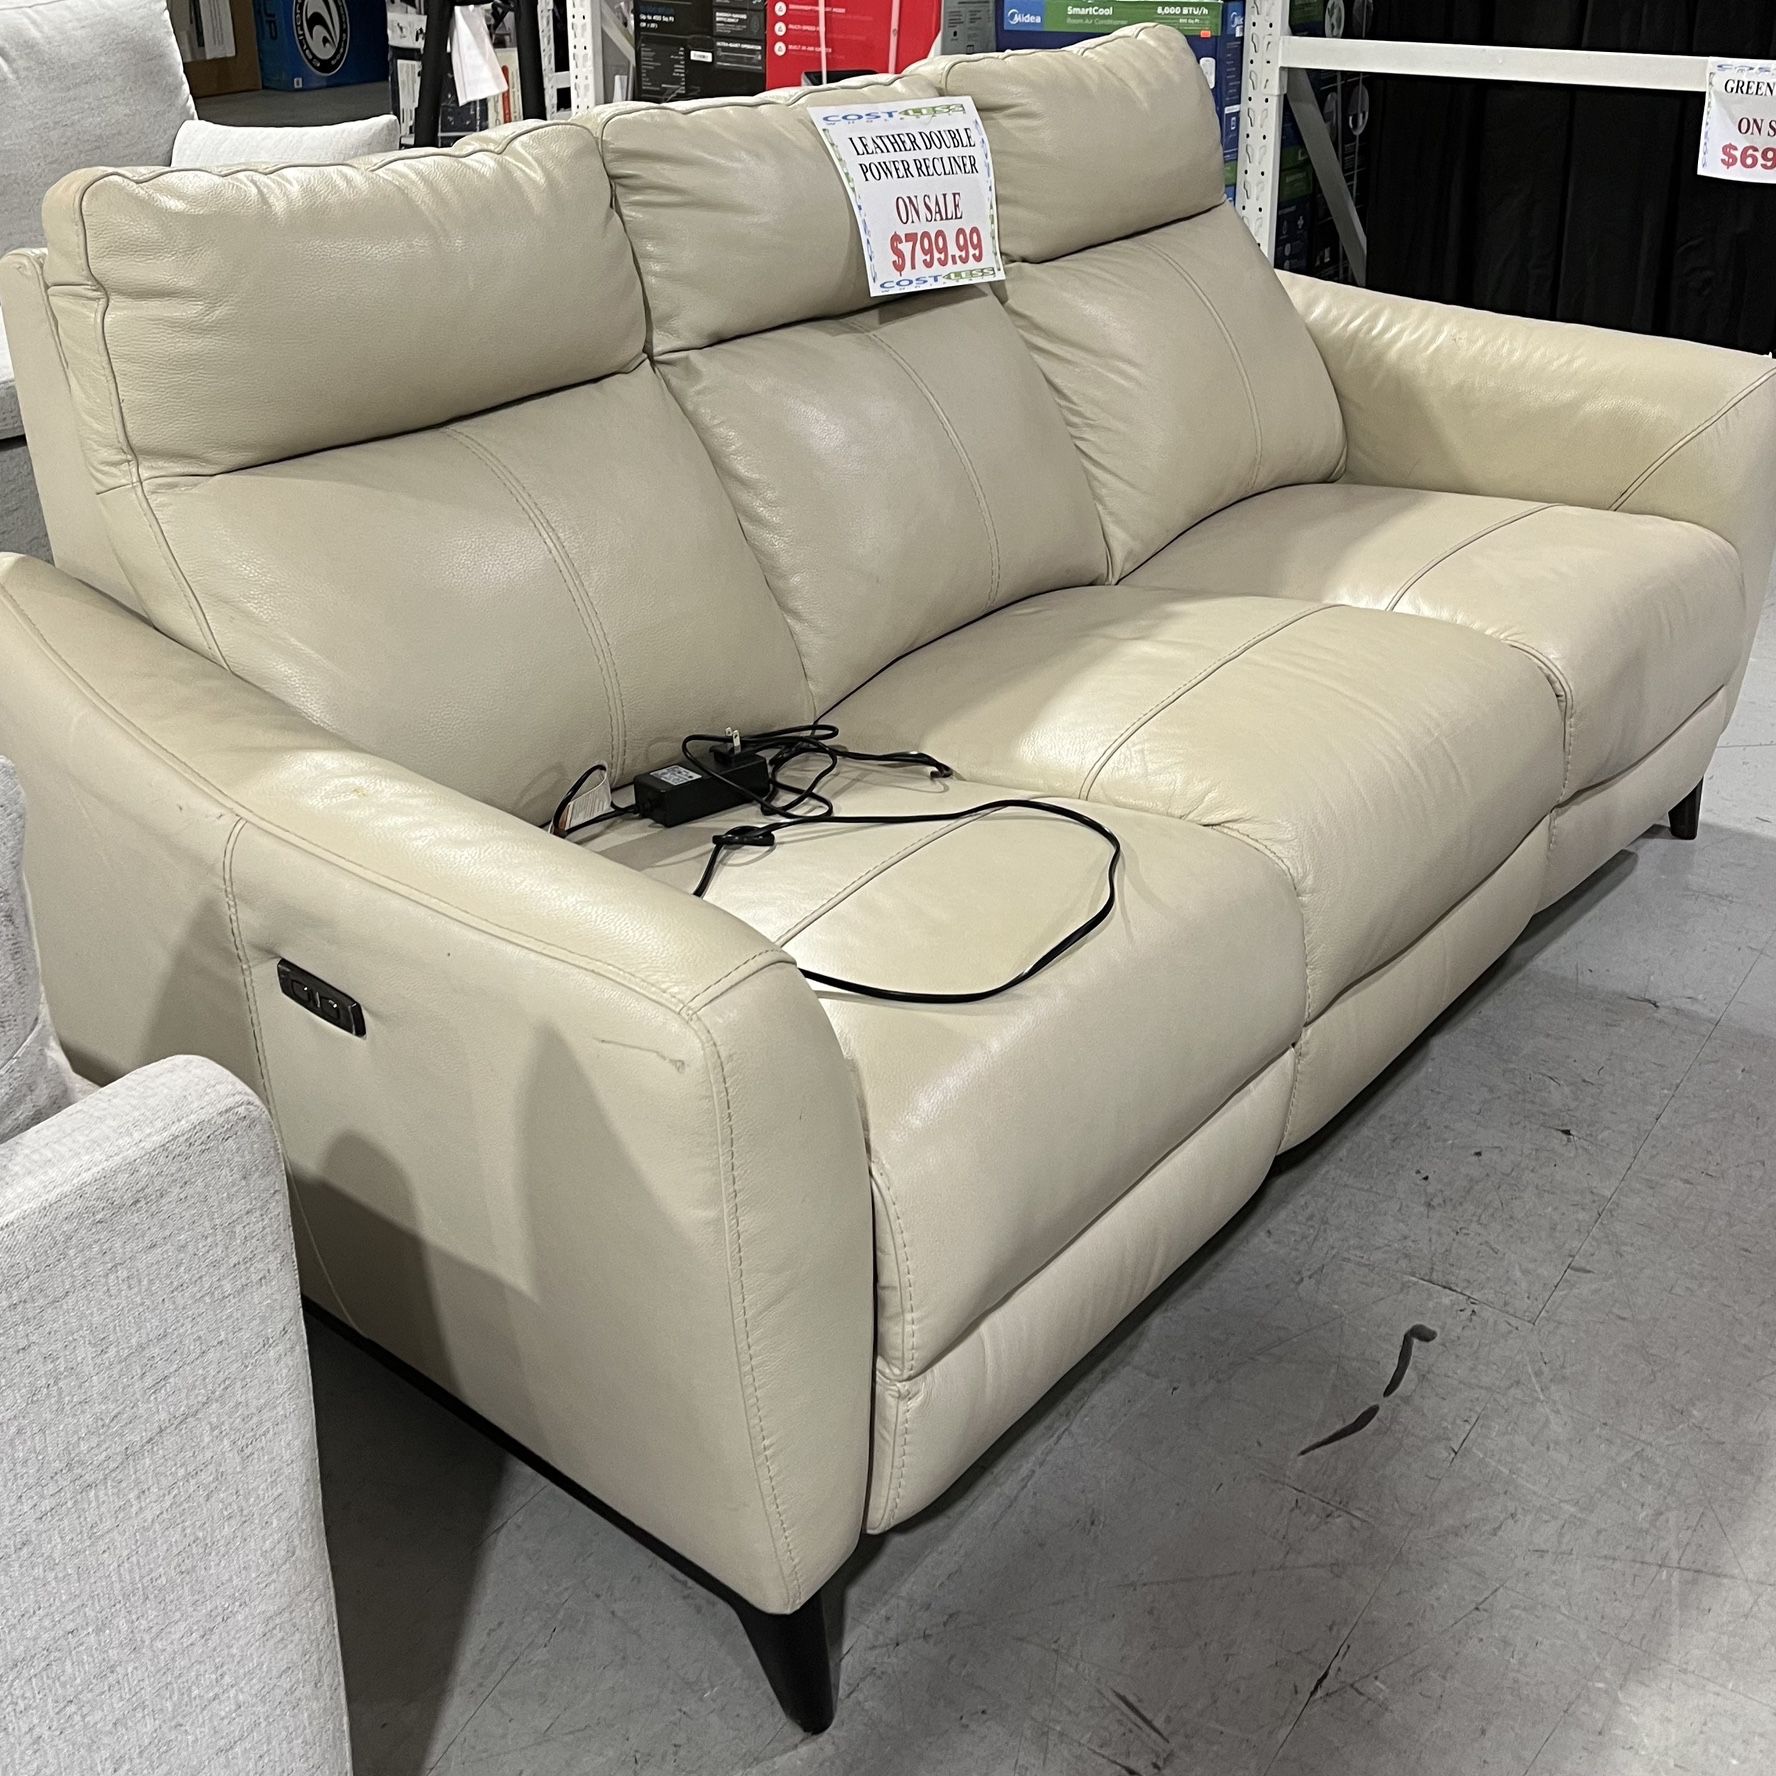 LEATHER DOUBLE POWER RECLINER $799.99